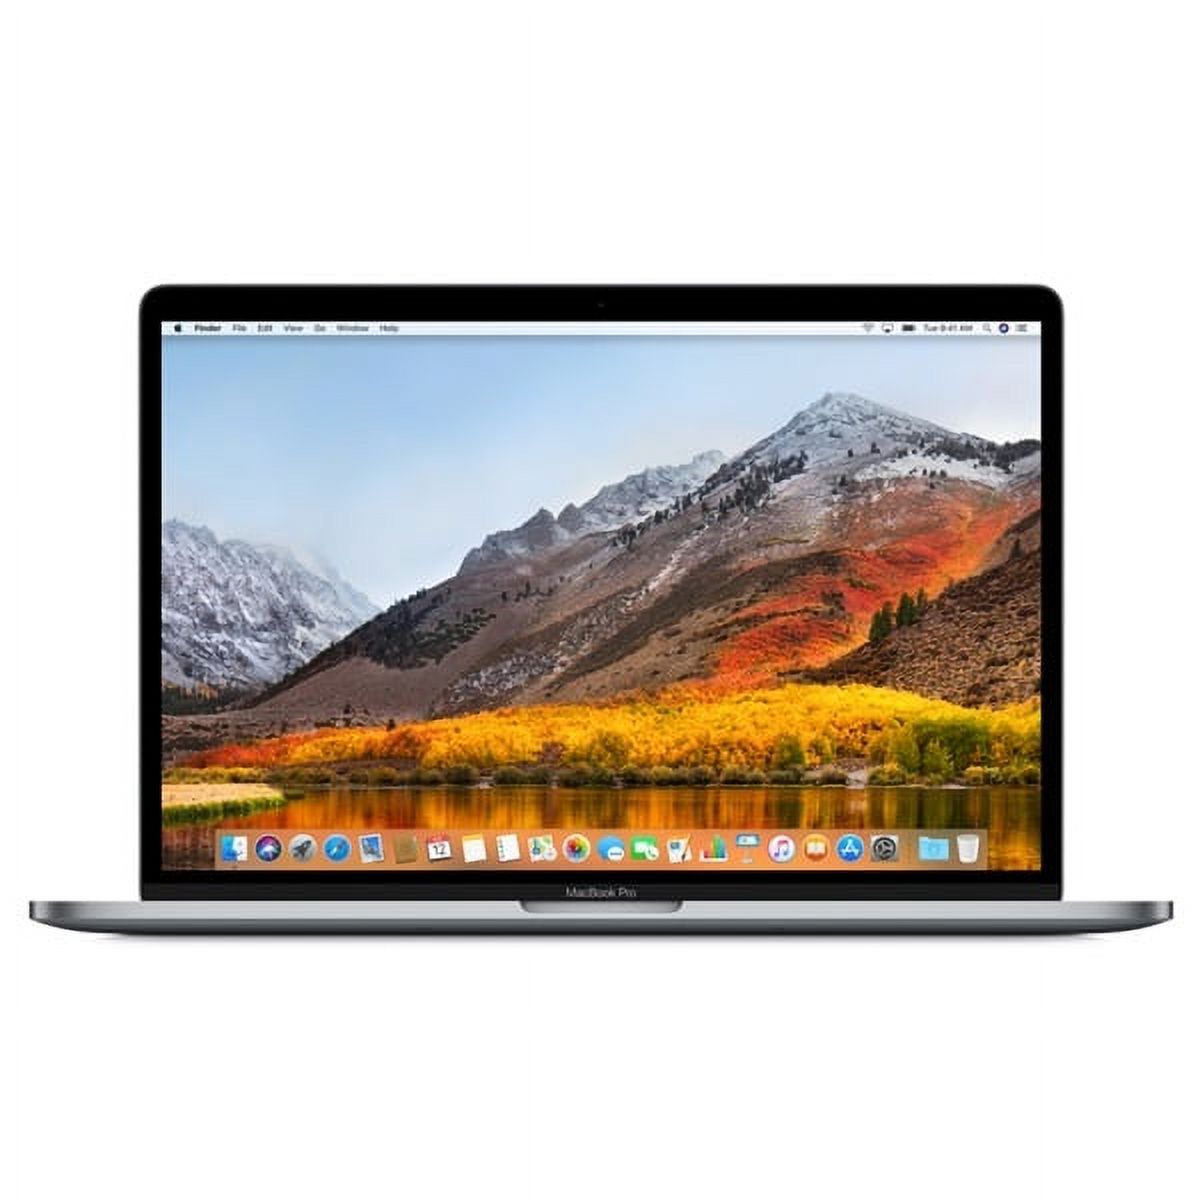 Pre-Owned Apple MacBook Pro Laptop, FHD 15" Retina Display with Touch Bar OR Touch ID45, Intel Core i7, 16GB RAM, 256GB SSD, MacOSx Catalina, Silver, MPTT2LL/A (Good) - image 4 of 4